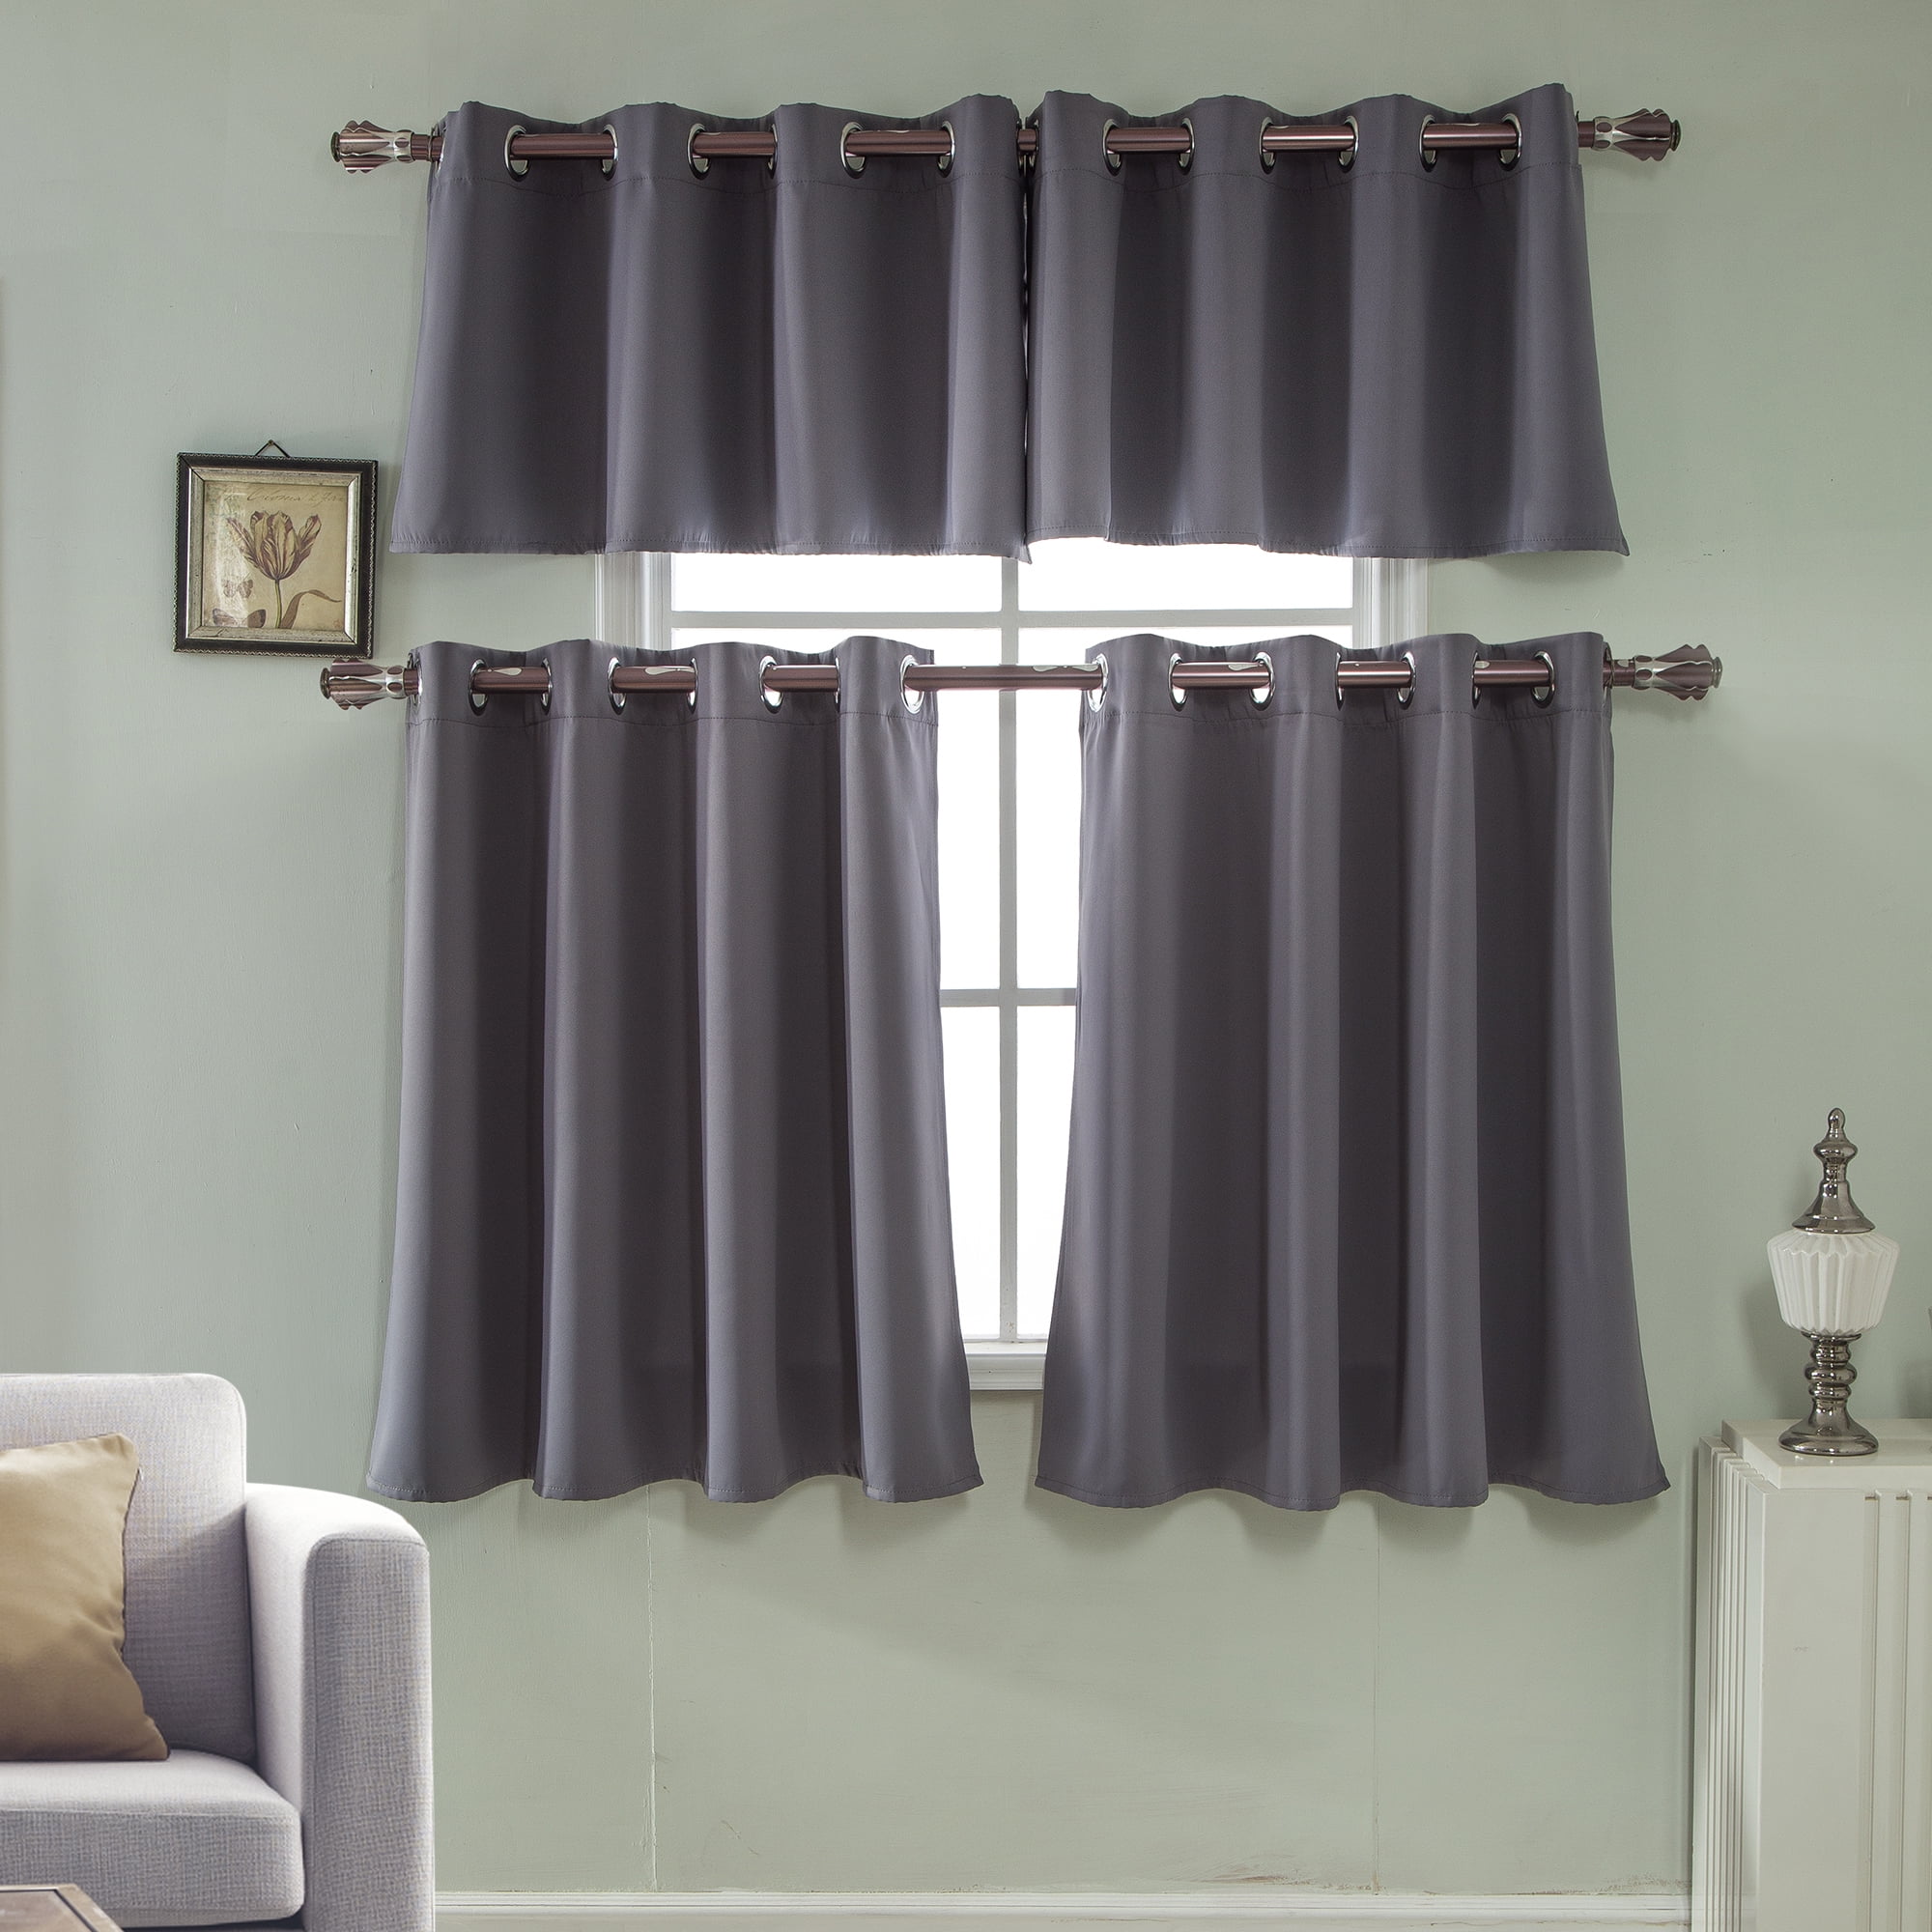 New Short Window Curtains Eyelet Ring Top Kitchen Bedroom Bathroom Ring Top Pair 